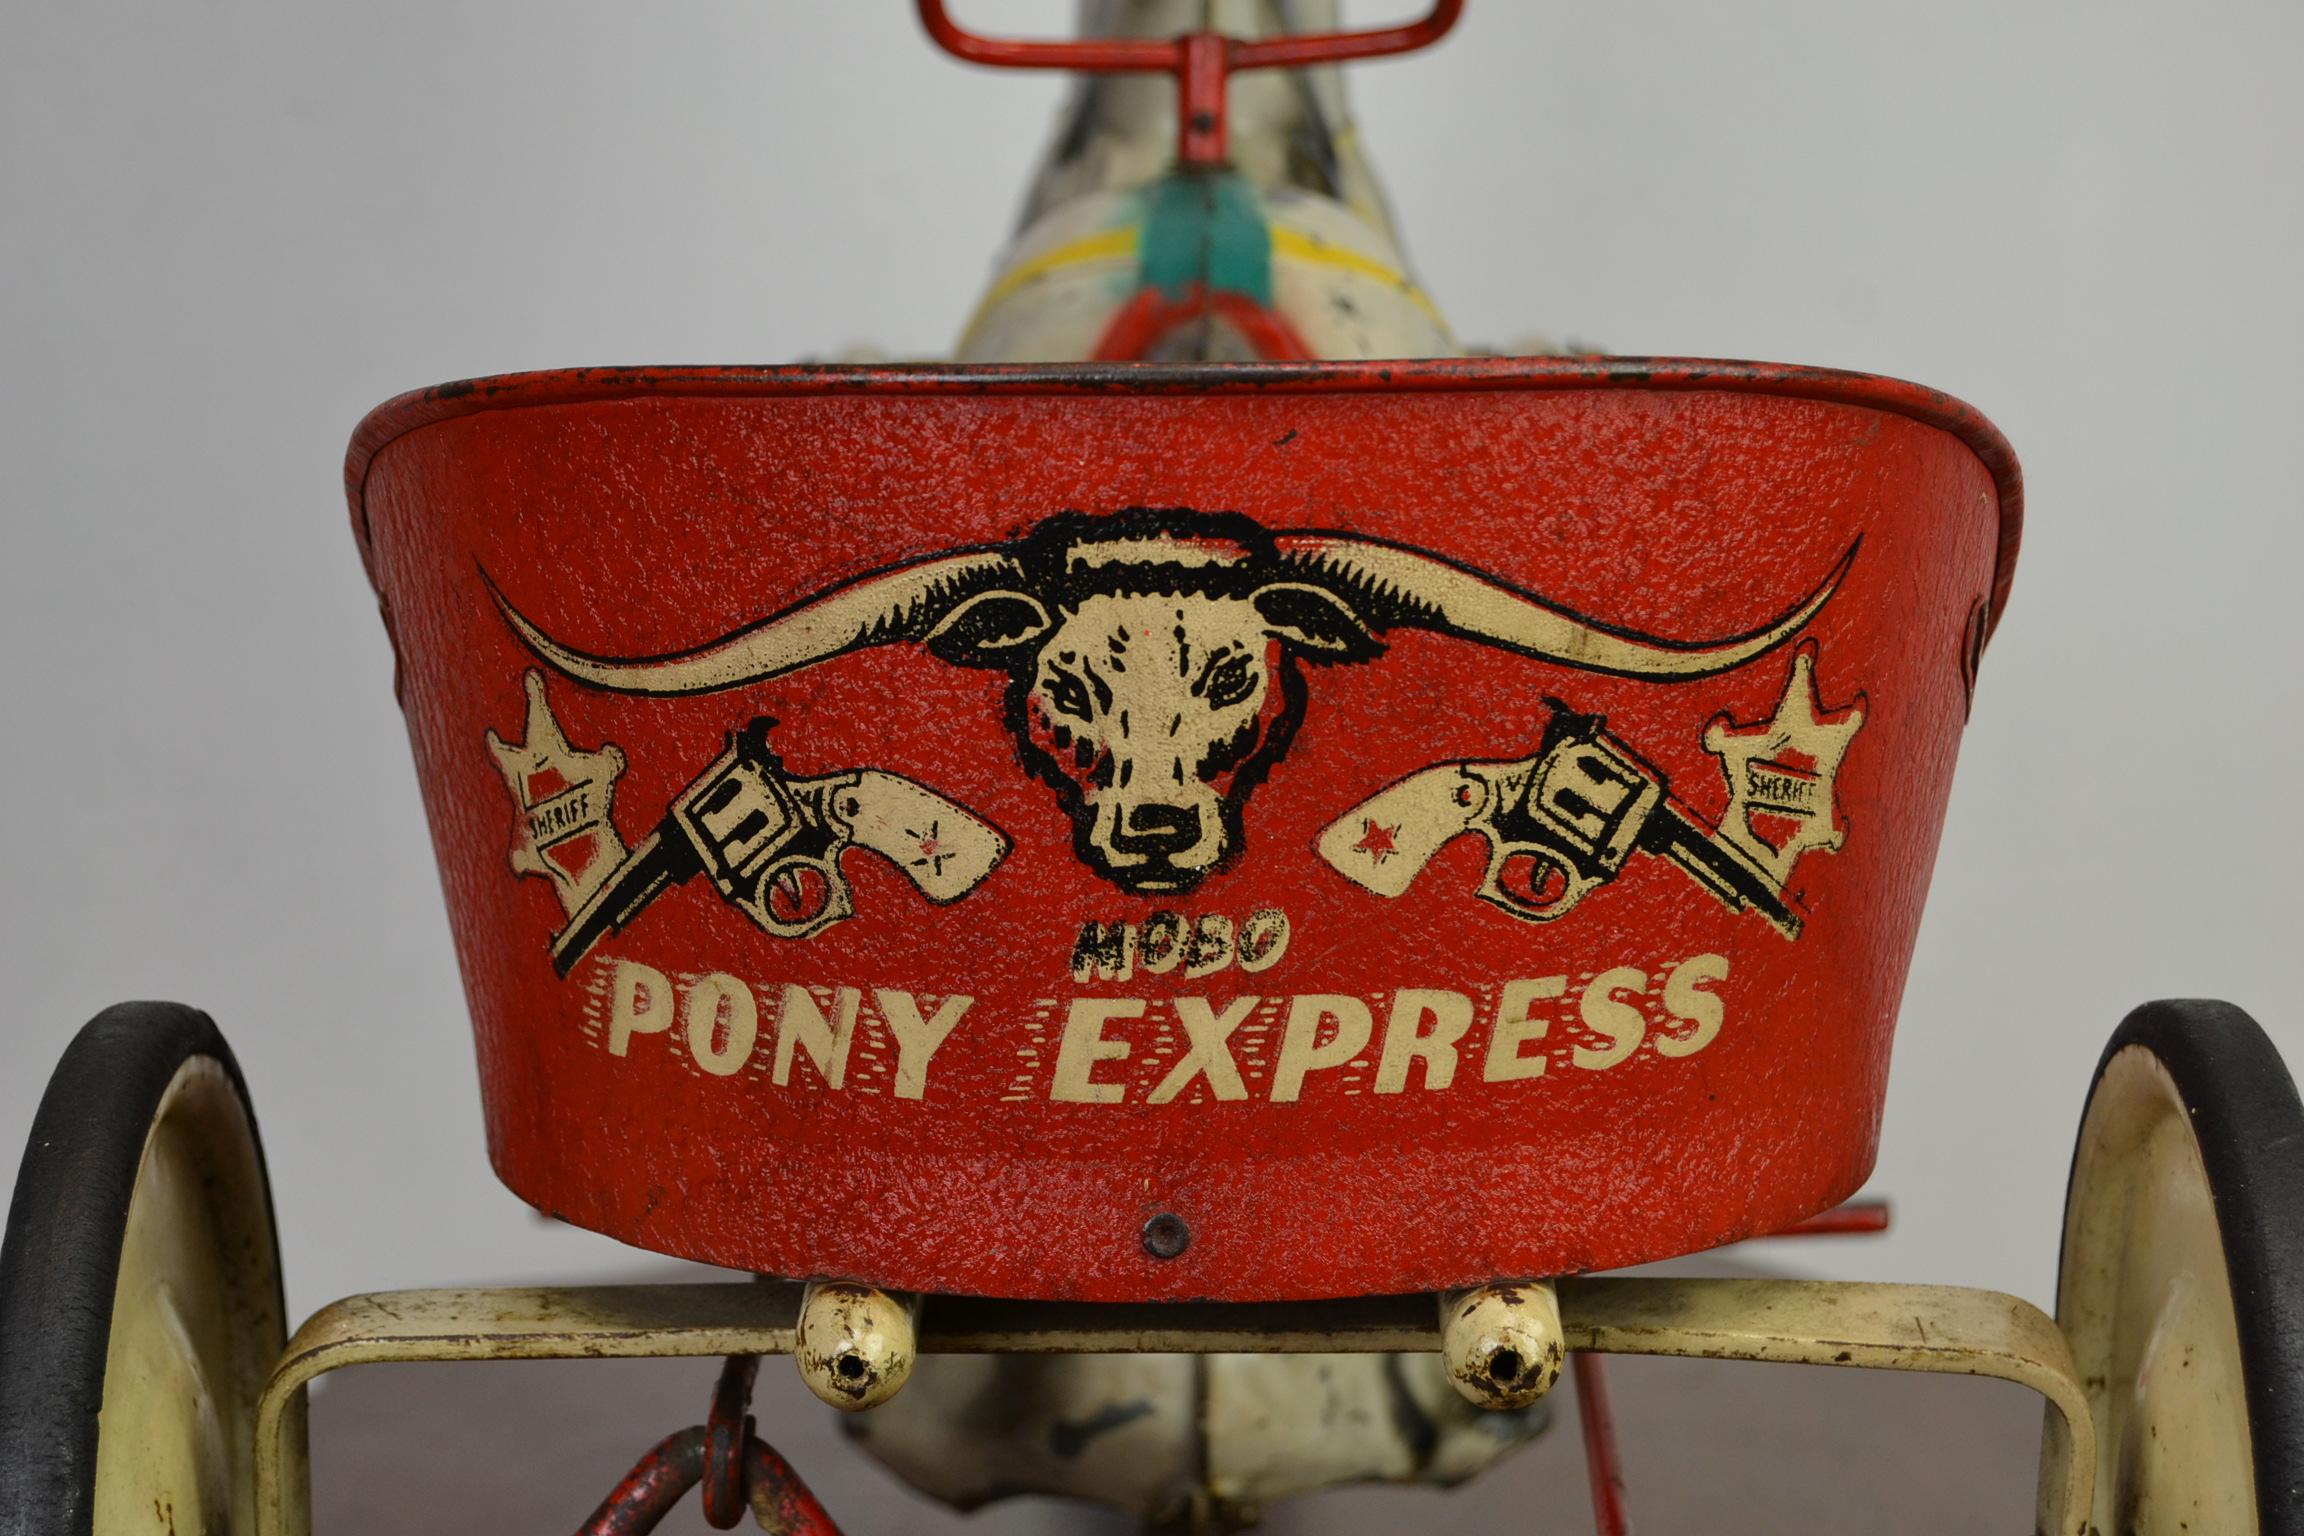 mobo pony express pedal car